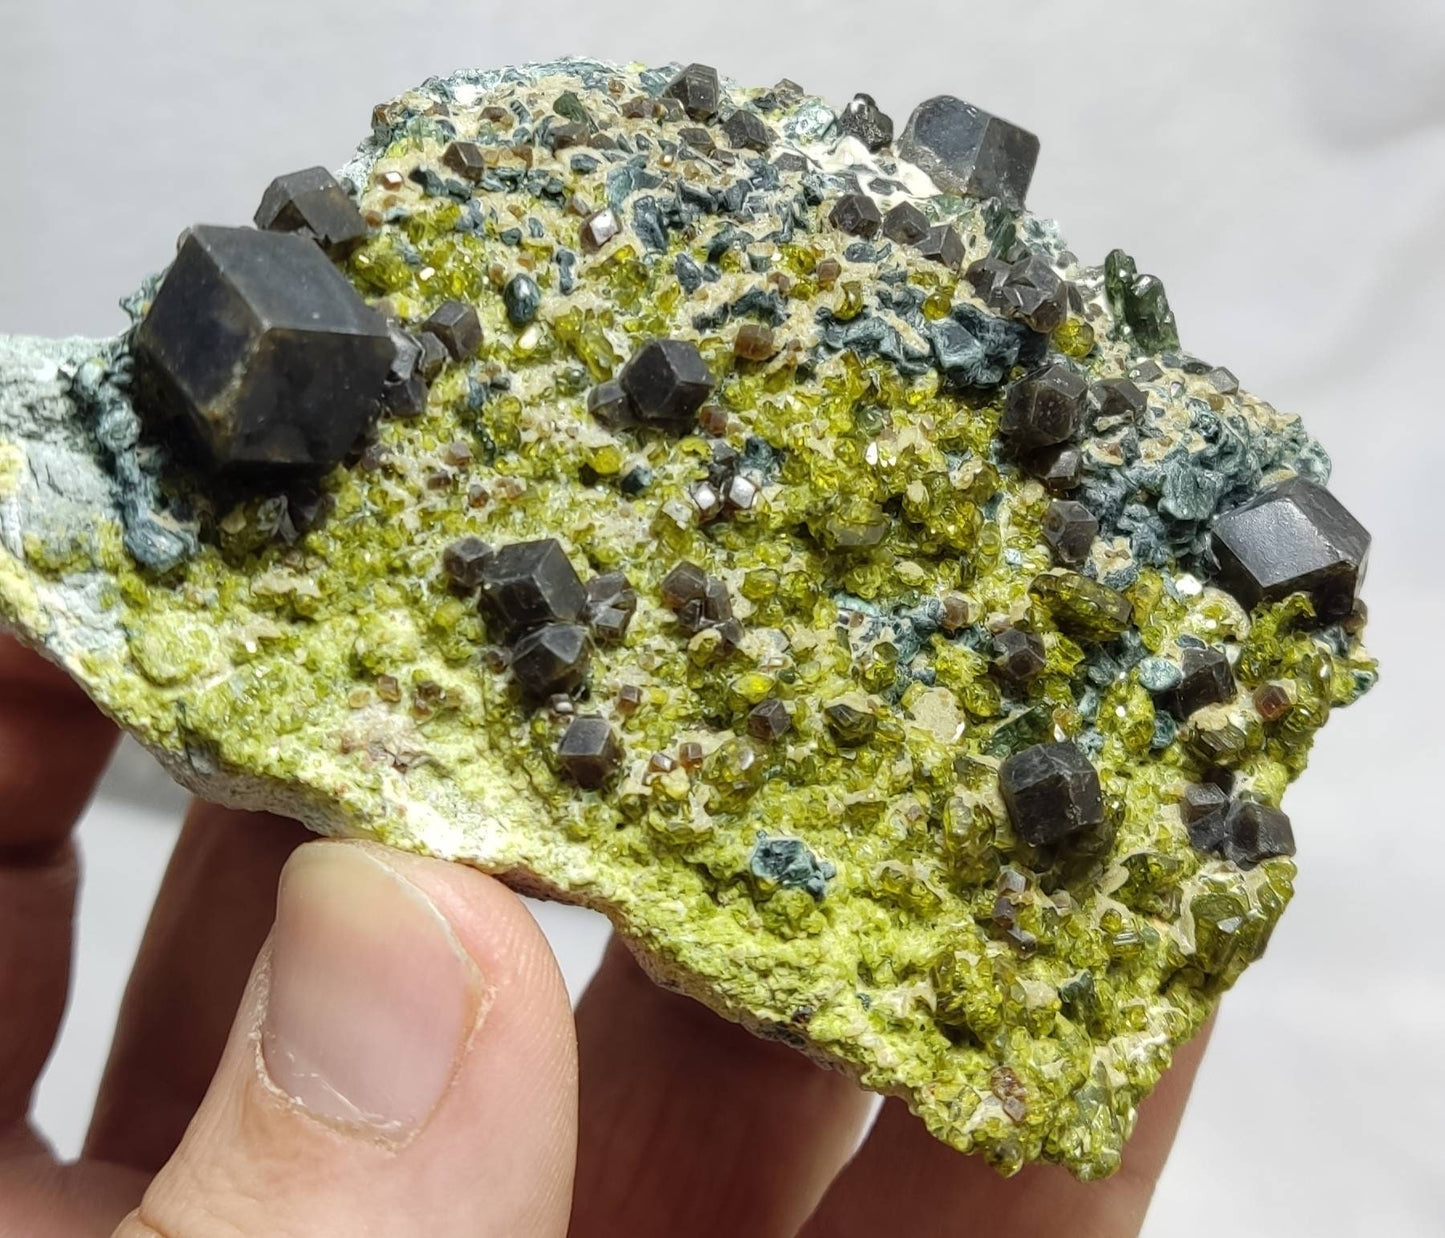 Andradite garnet crystals on matrix with epidote and clinochlore aesthetic specimen 210 grams